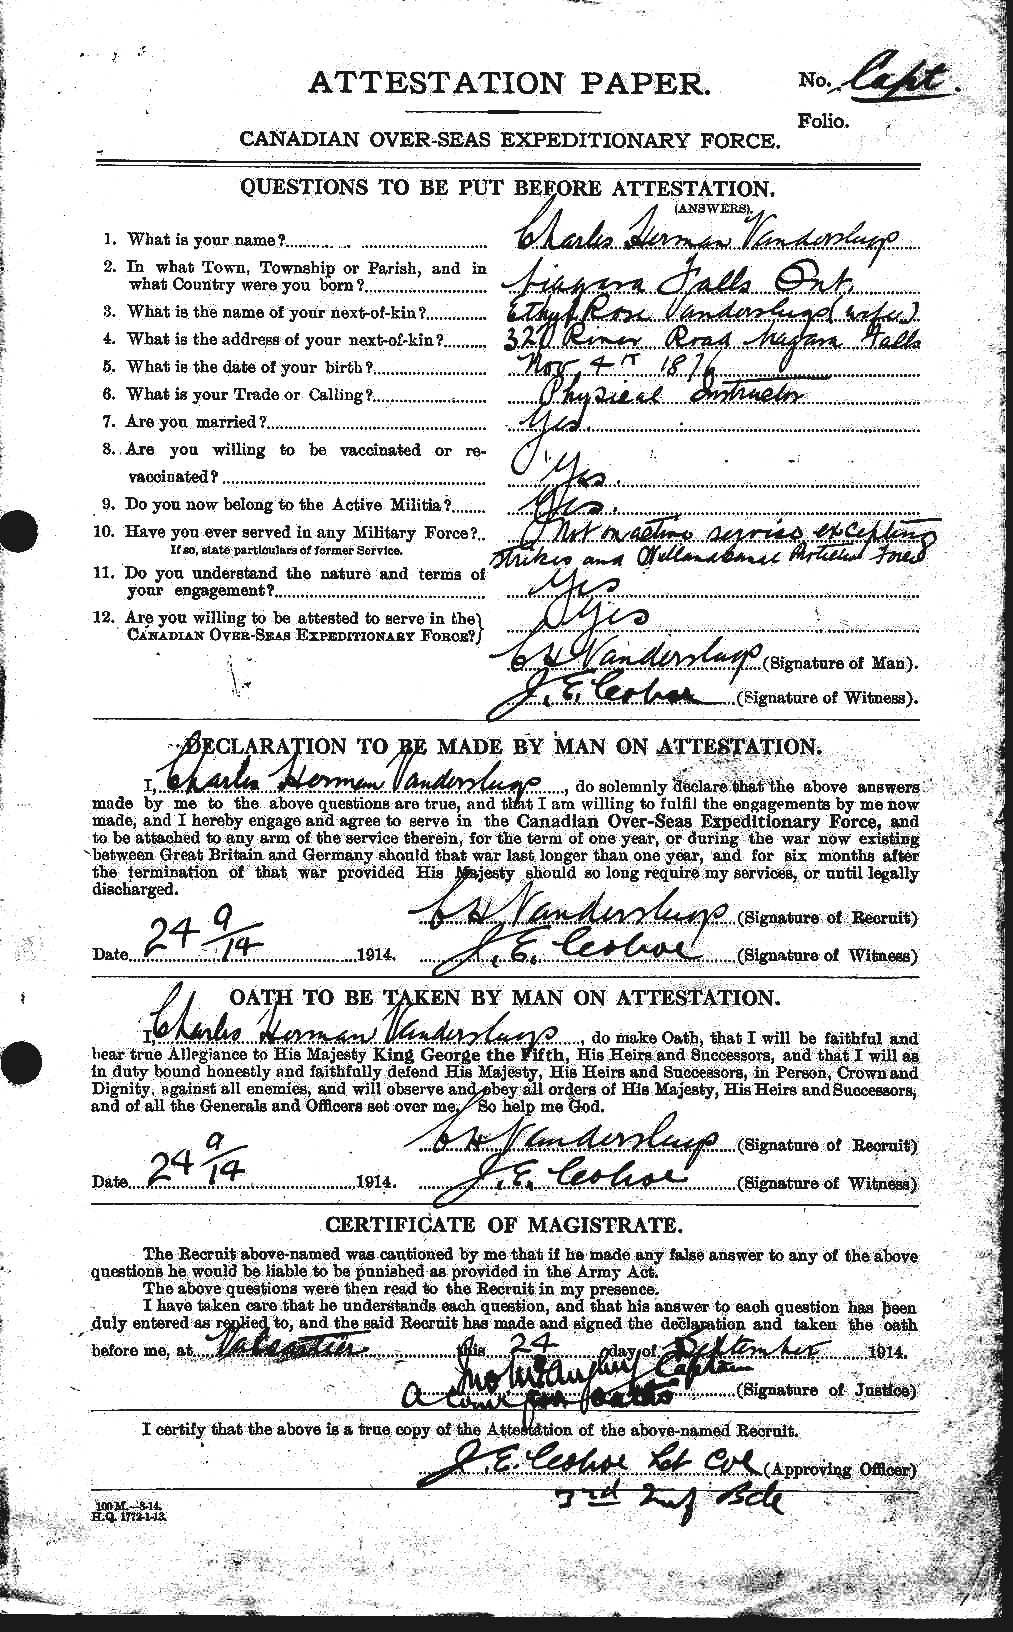 Personnel Records of the First World War - CEF 647303a